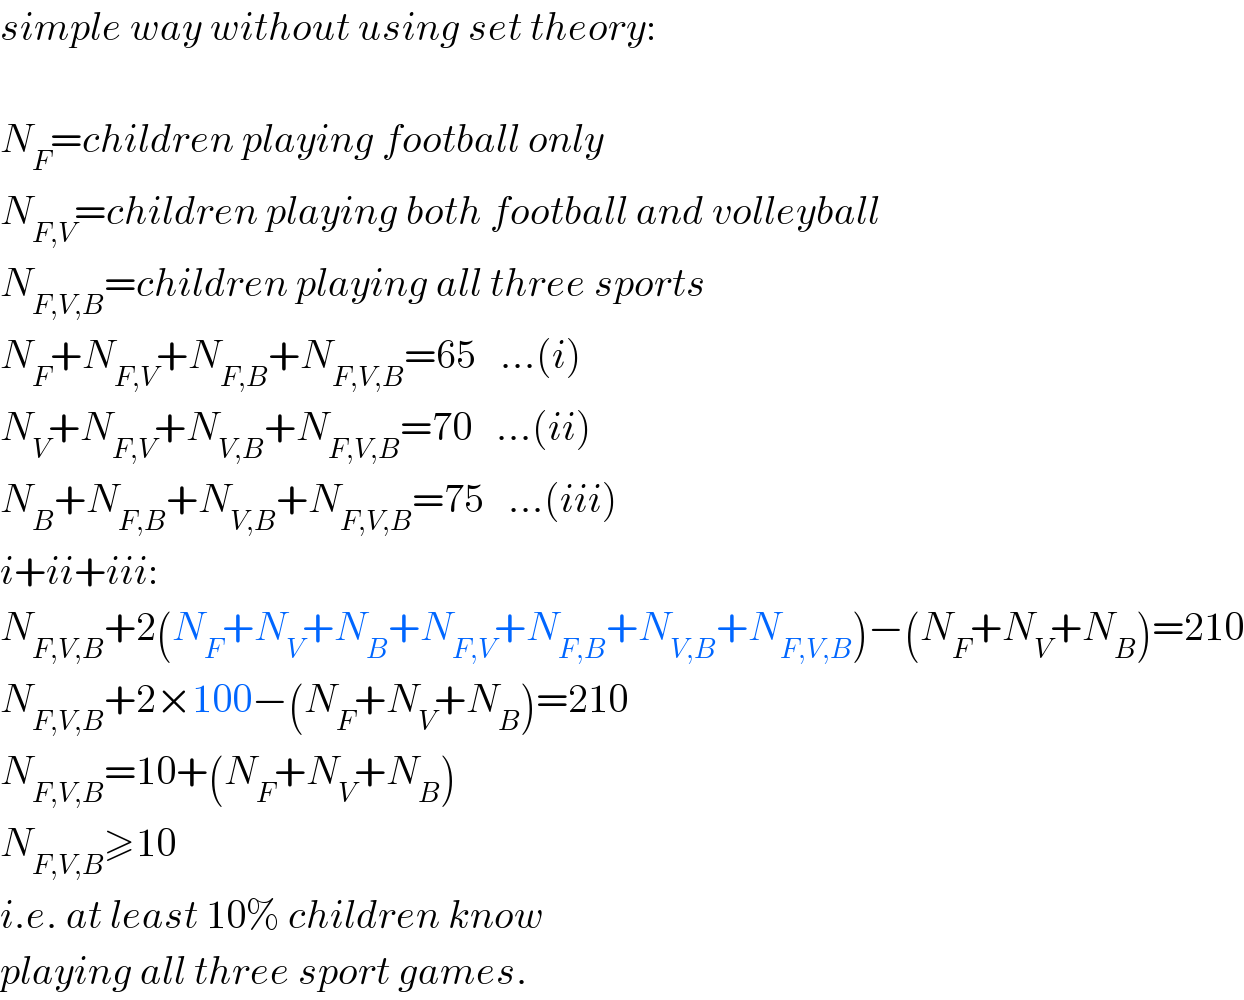 simple way without using set theory:    N_F =children playing football only  N_(F,V) =children playing both football and volleyball  N_(F,V,B) =children playing all three sports  N_F +N_(F,V) +N_(F,B) +N_(F,V,B) =65   ...(i)  N_V +N_(F,V) +N_(V,B) +N_(F,V,B) =70   ...(ii)  N_B +N_(F,B) +N_(V,B) +N_(F,V,B) =75   ...(iii)  i+ii+iii:  N_(F,V,B) +2(N_F +N_V +N_B +N_(F,V) +N_(F,B) +N_(V,B) +N_(F,V,B) )−(N_F +N_V +N_B )=210  N_(F,V,B) +2×100−(N_F +N_V +N_B )=210  N_(F,V,B) =10+(N_F +N_V +N_B )  N_(F,V,B) ≥10  i.e. at least 10% children know  playing all three sport games.  